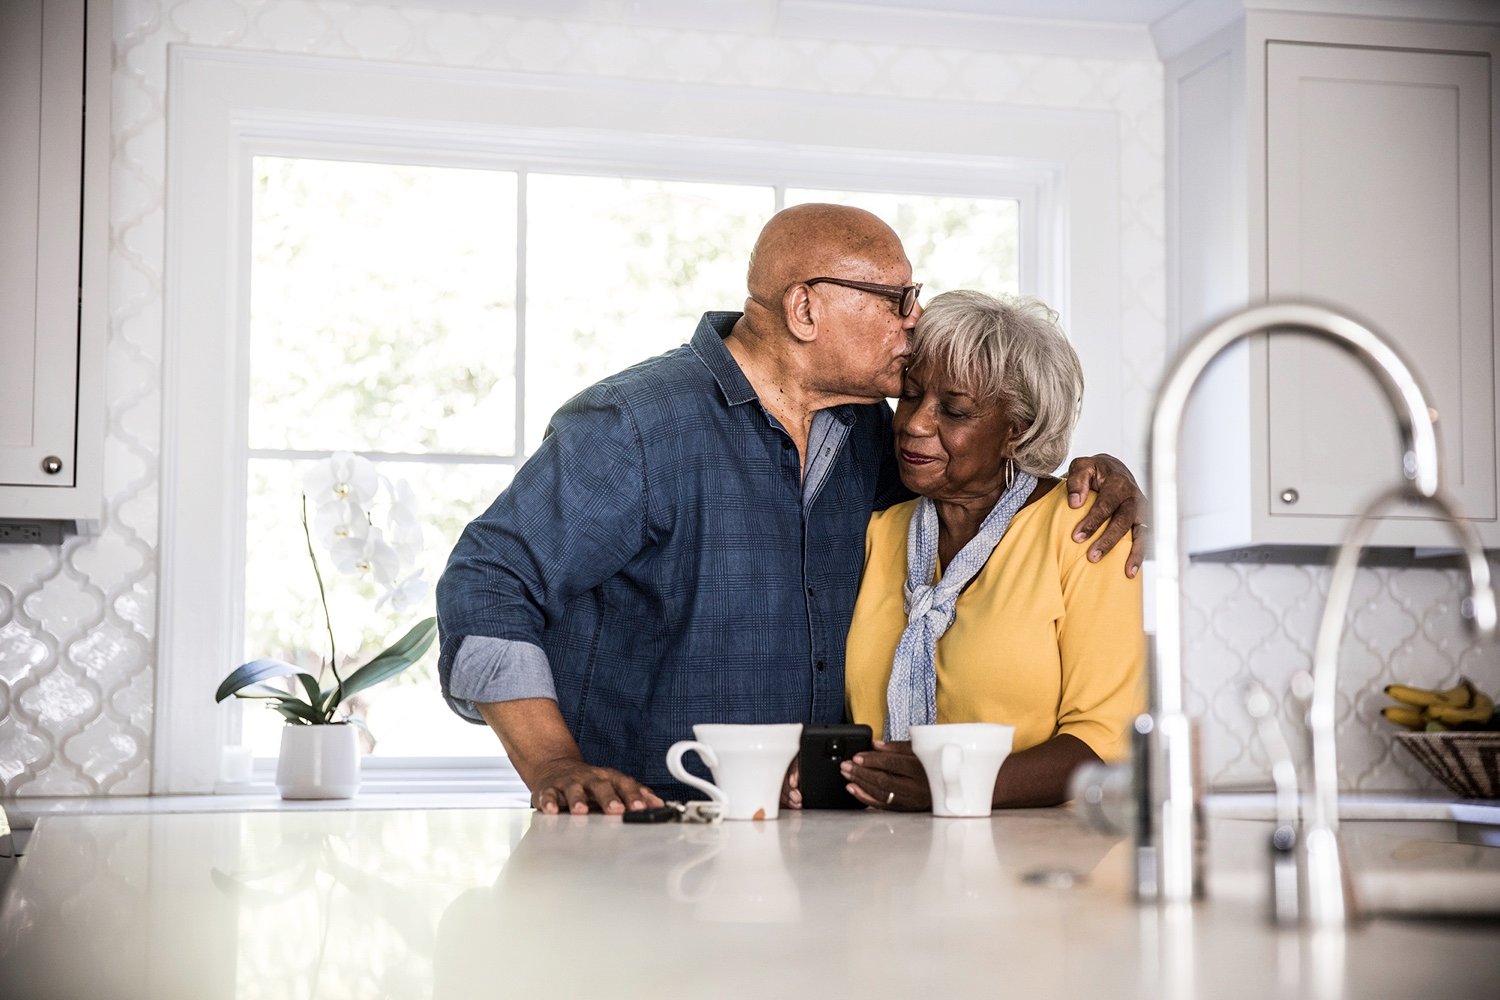 A happy senior couple embracing in a kitchen